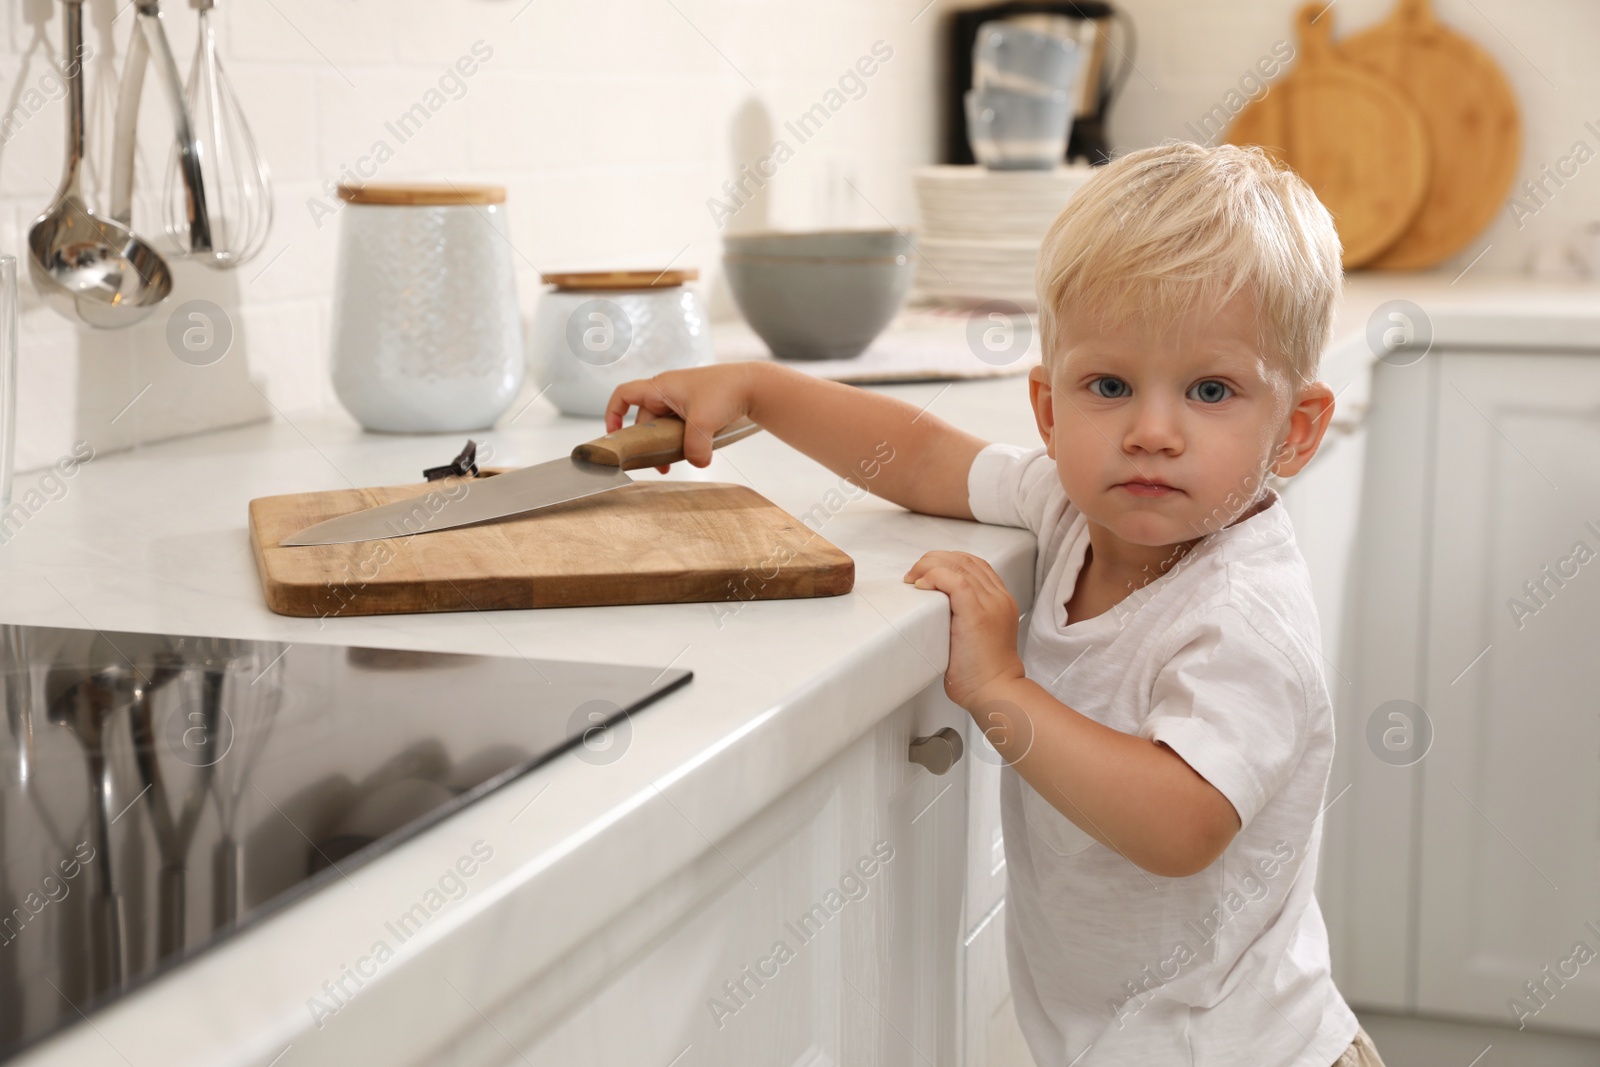 Photo of Curious little boy taking sharp knife from kitchen counter